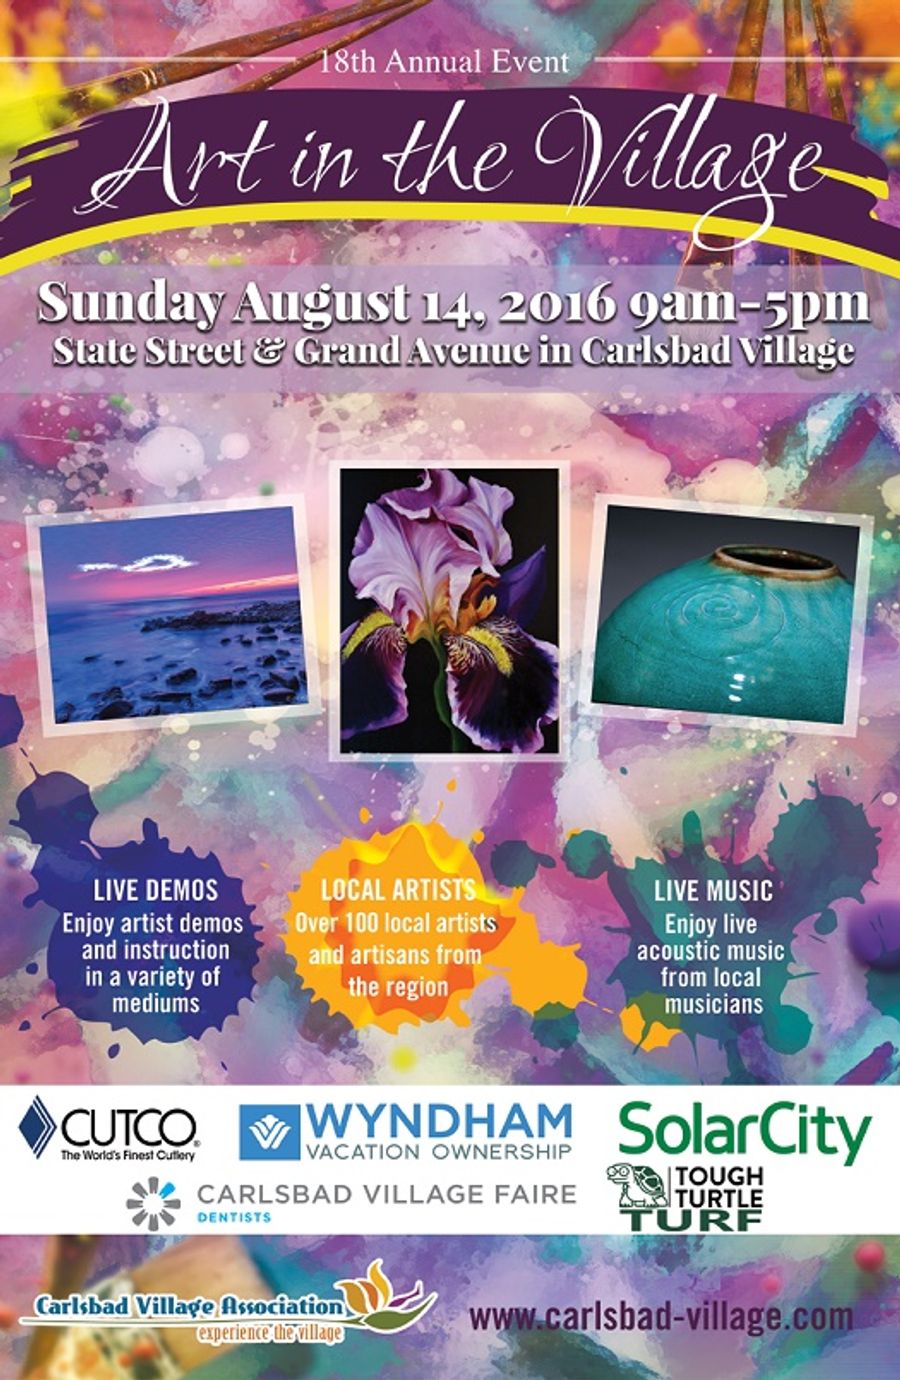 18th Annual Art in the Village Comes to the Village August 14th